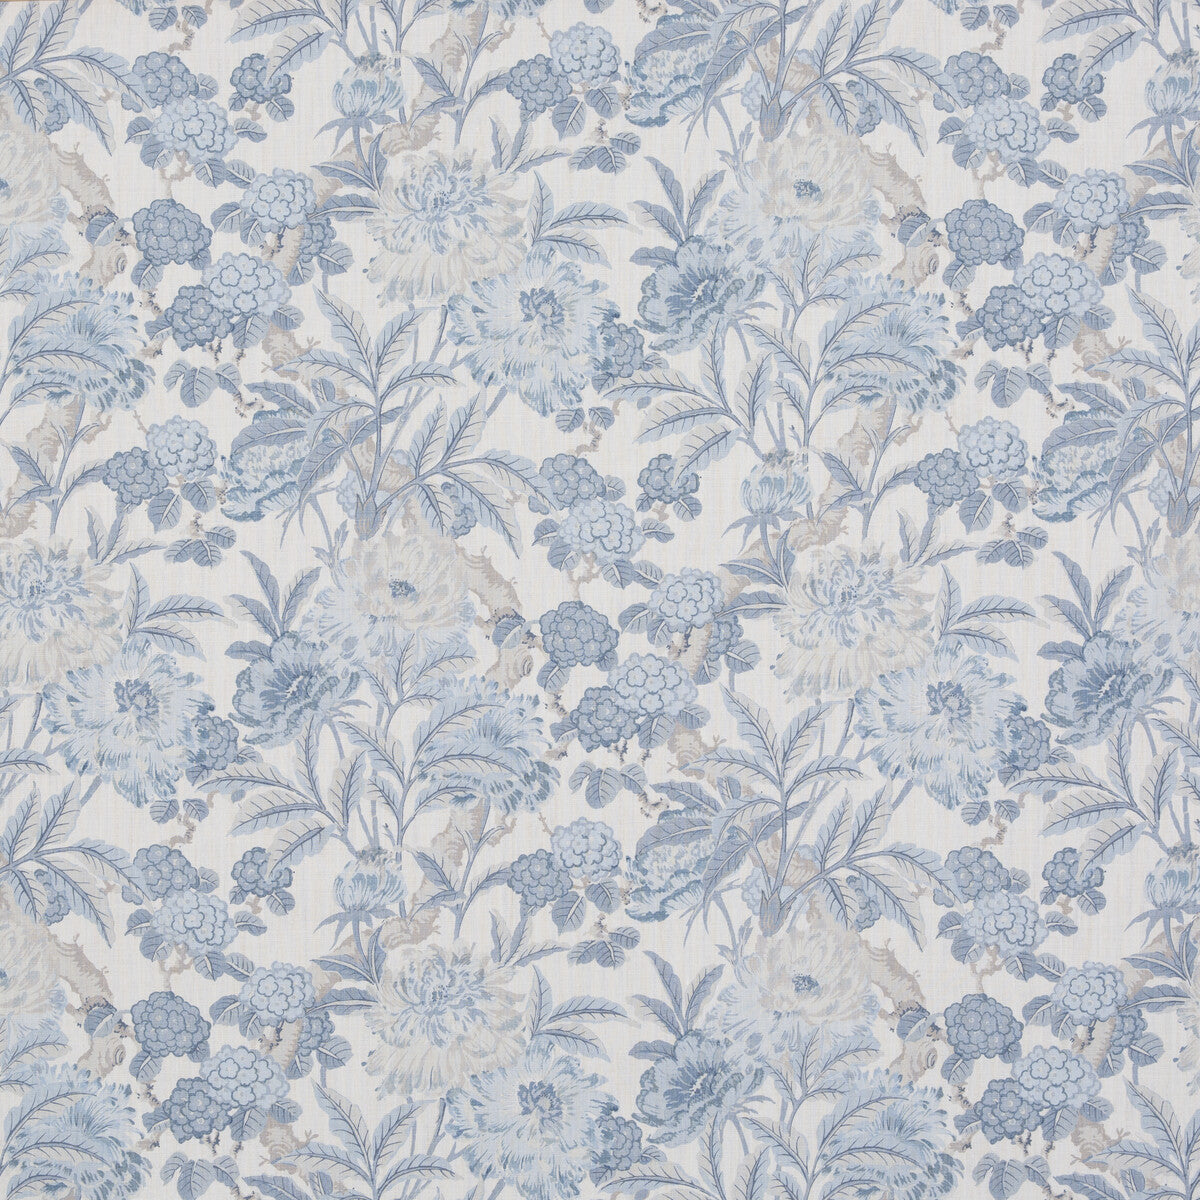 Summer Peony fabric in blue color - pattern BP10950.1.0 - by G P &amp; J Baker in the Ashmore collection